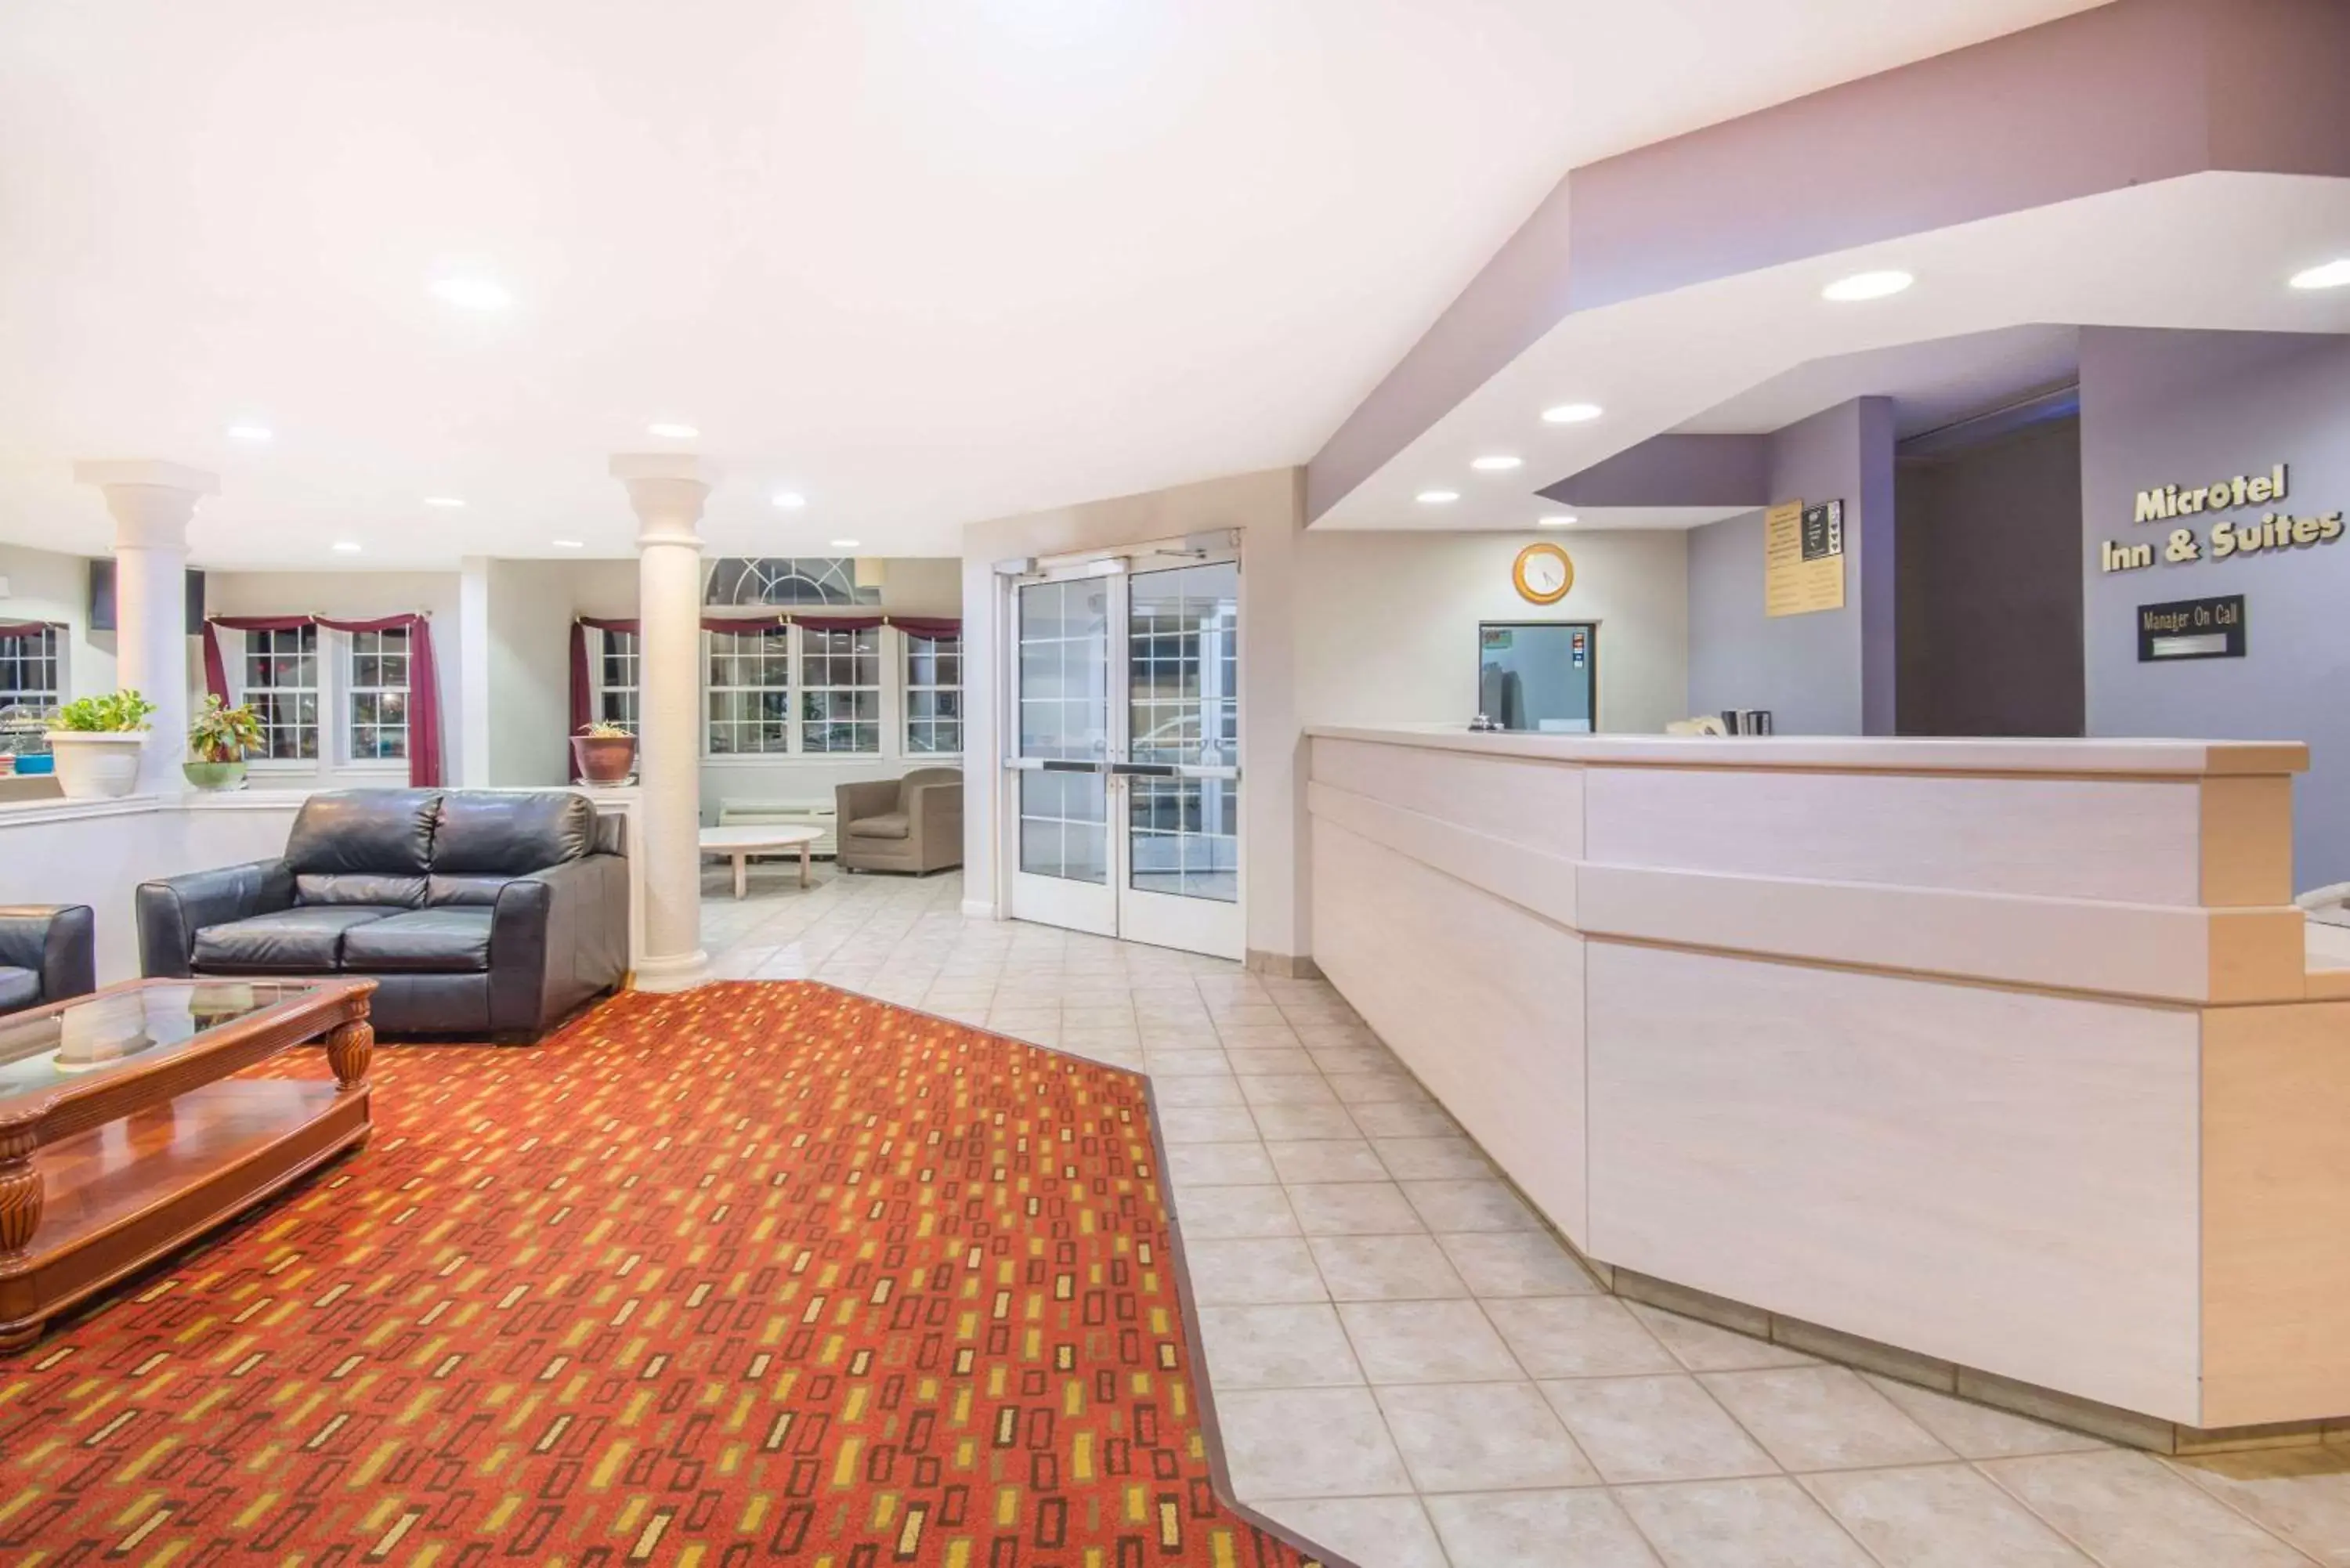 Lobby or reception in Microtel Inn & Suites Claremore